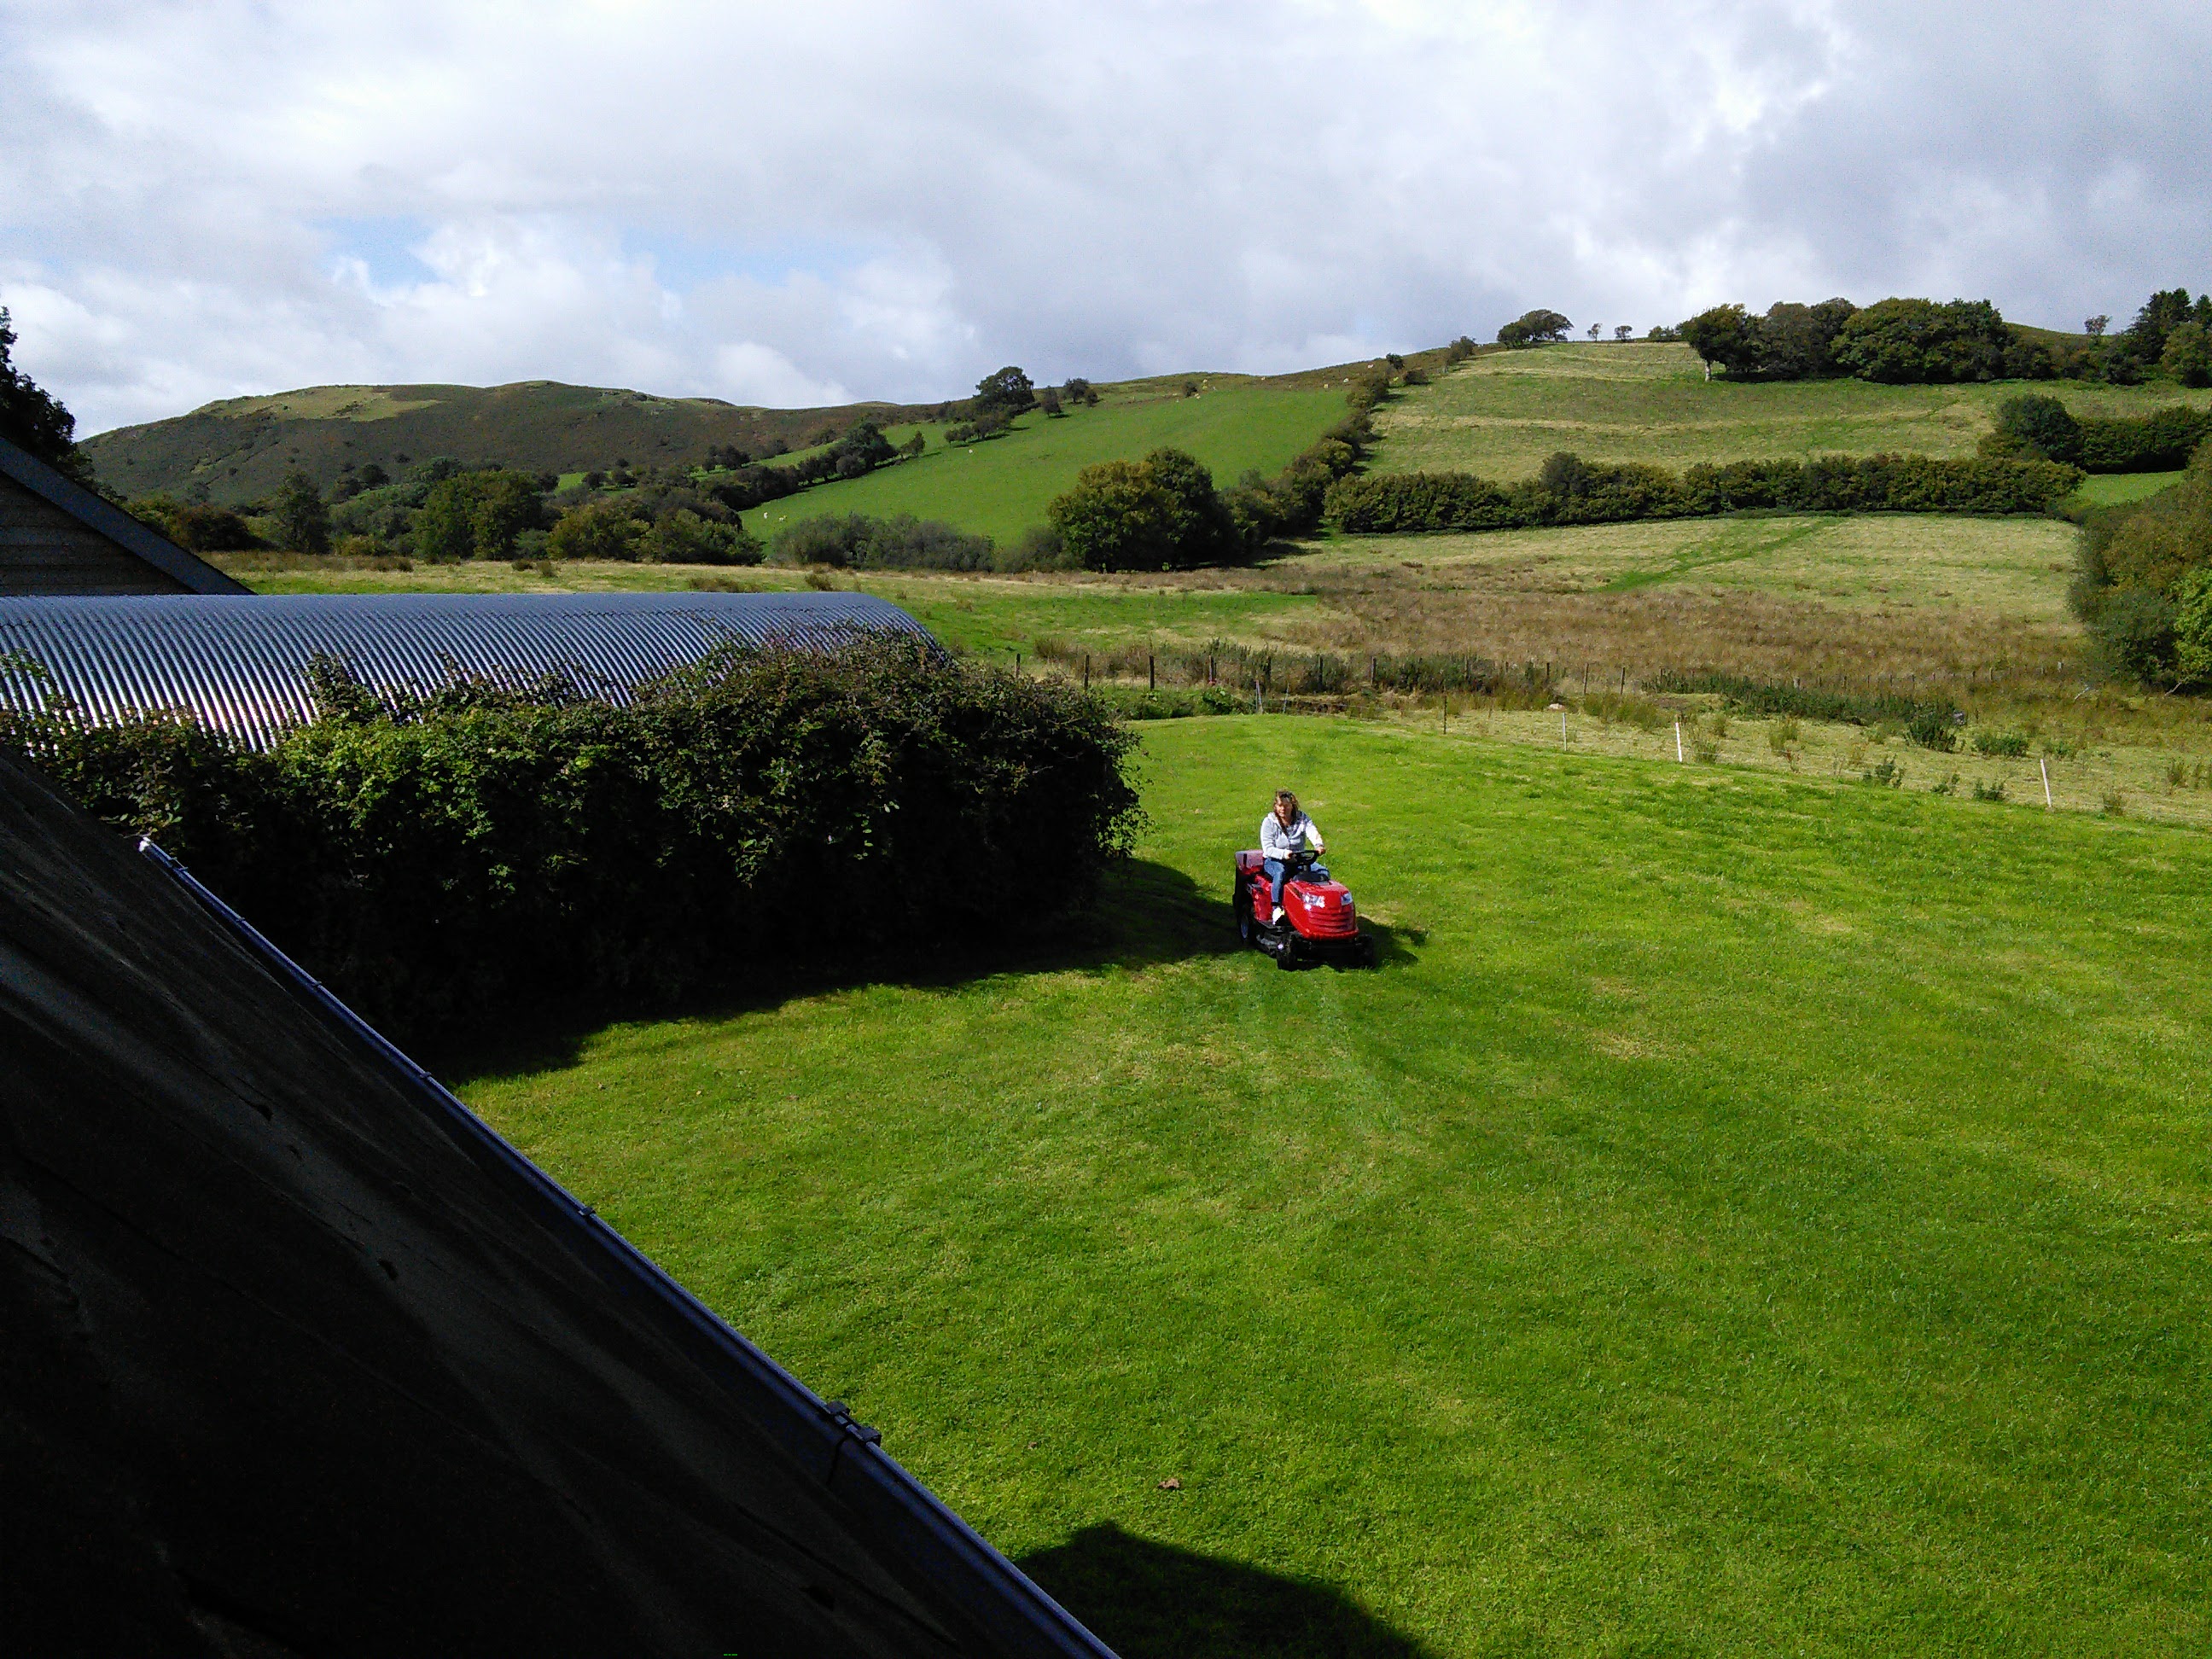 Jo mowing the grass in our back garden